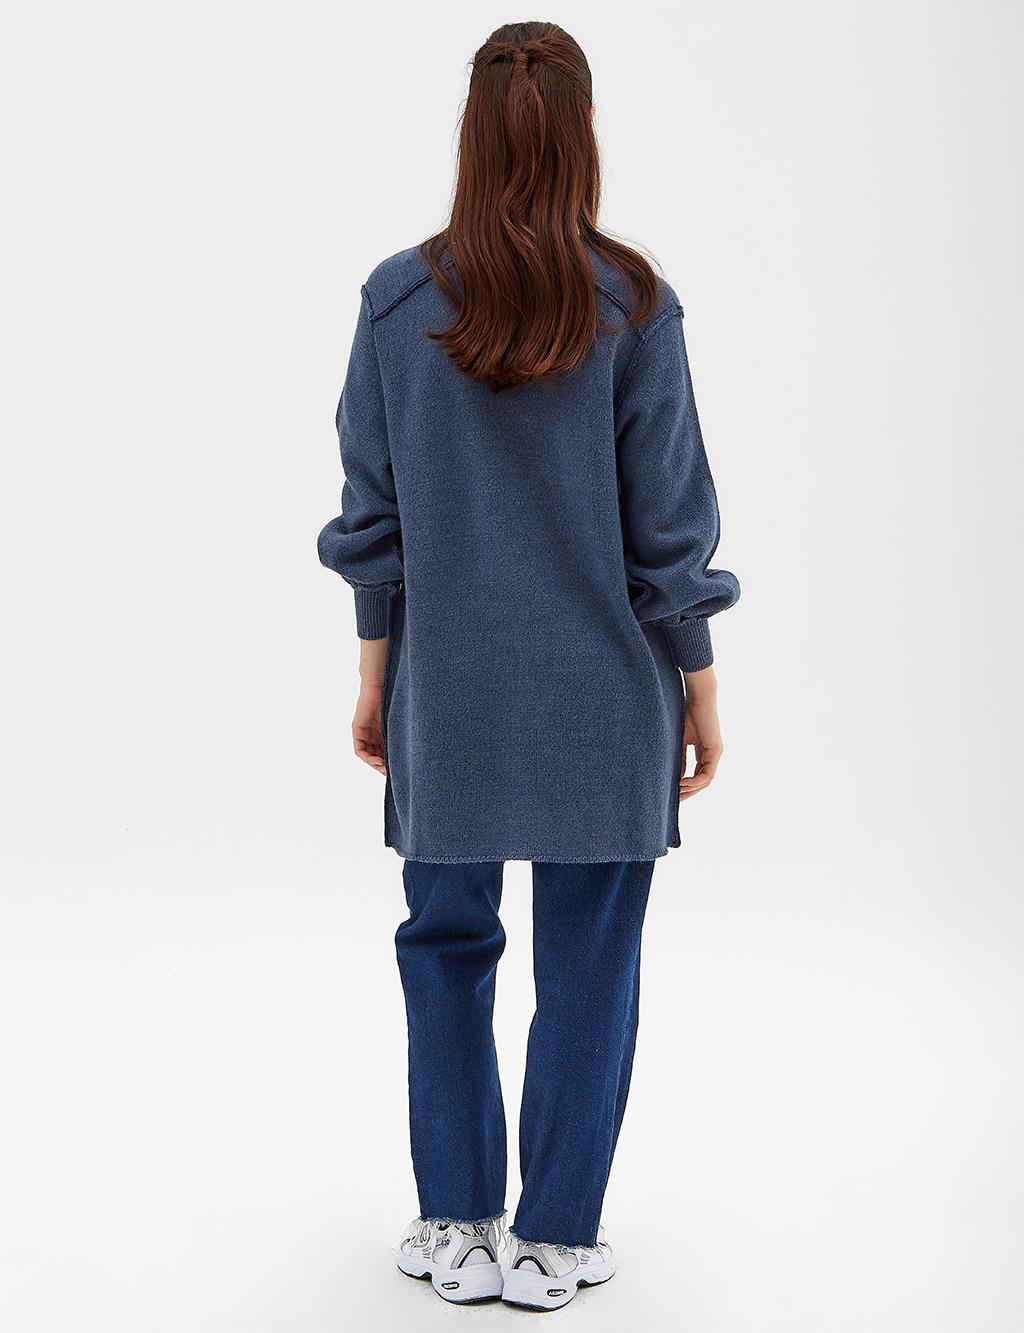 Knitwear Tunic With Chain Detail On The Shoulder, Dark Blue